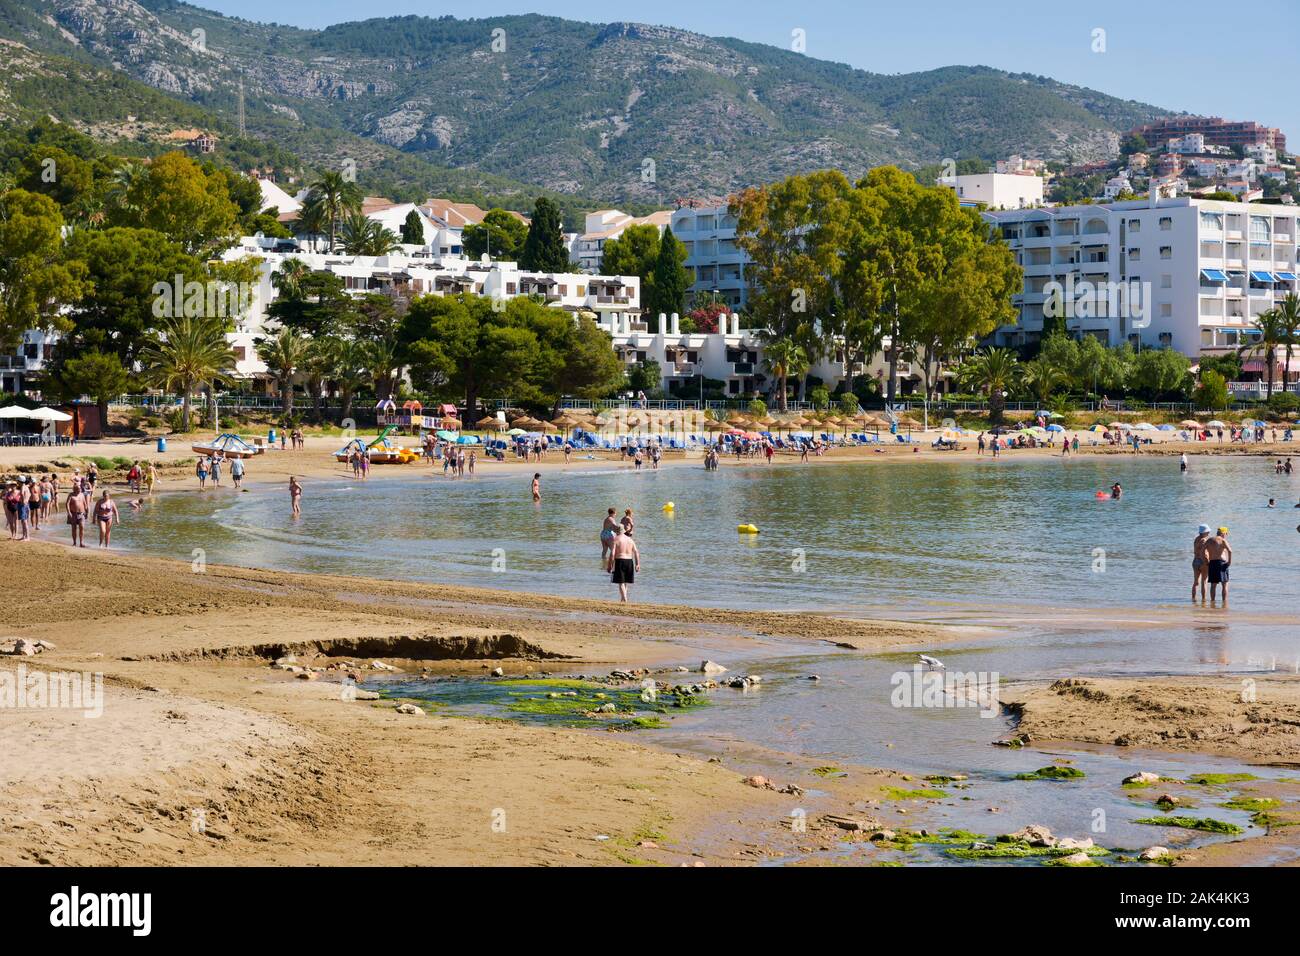 Playa De Las Fuentes High Resolution Stock Photography and Images - Alamy